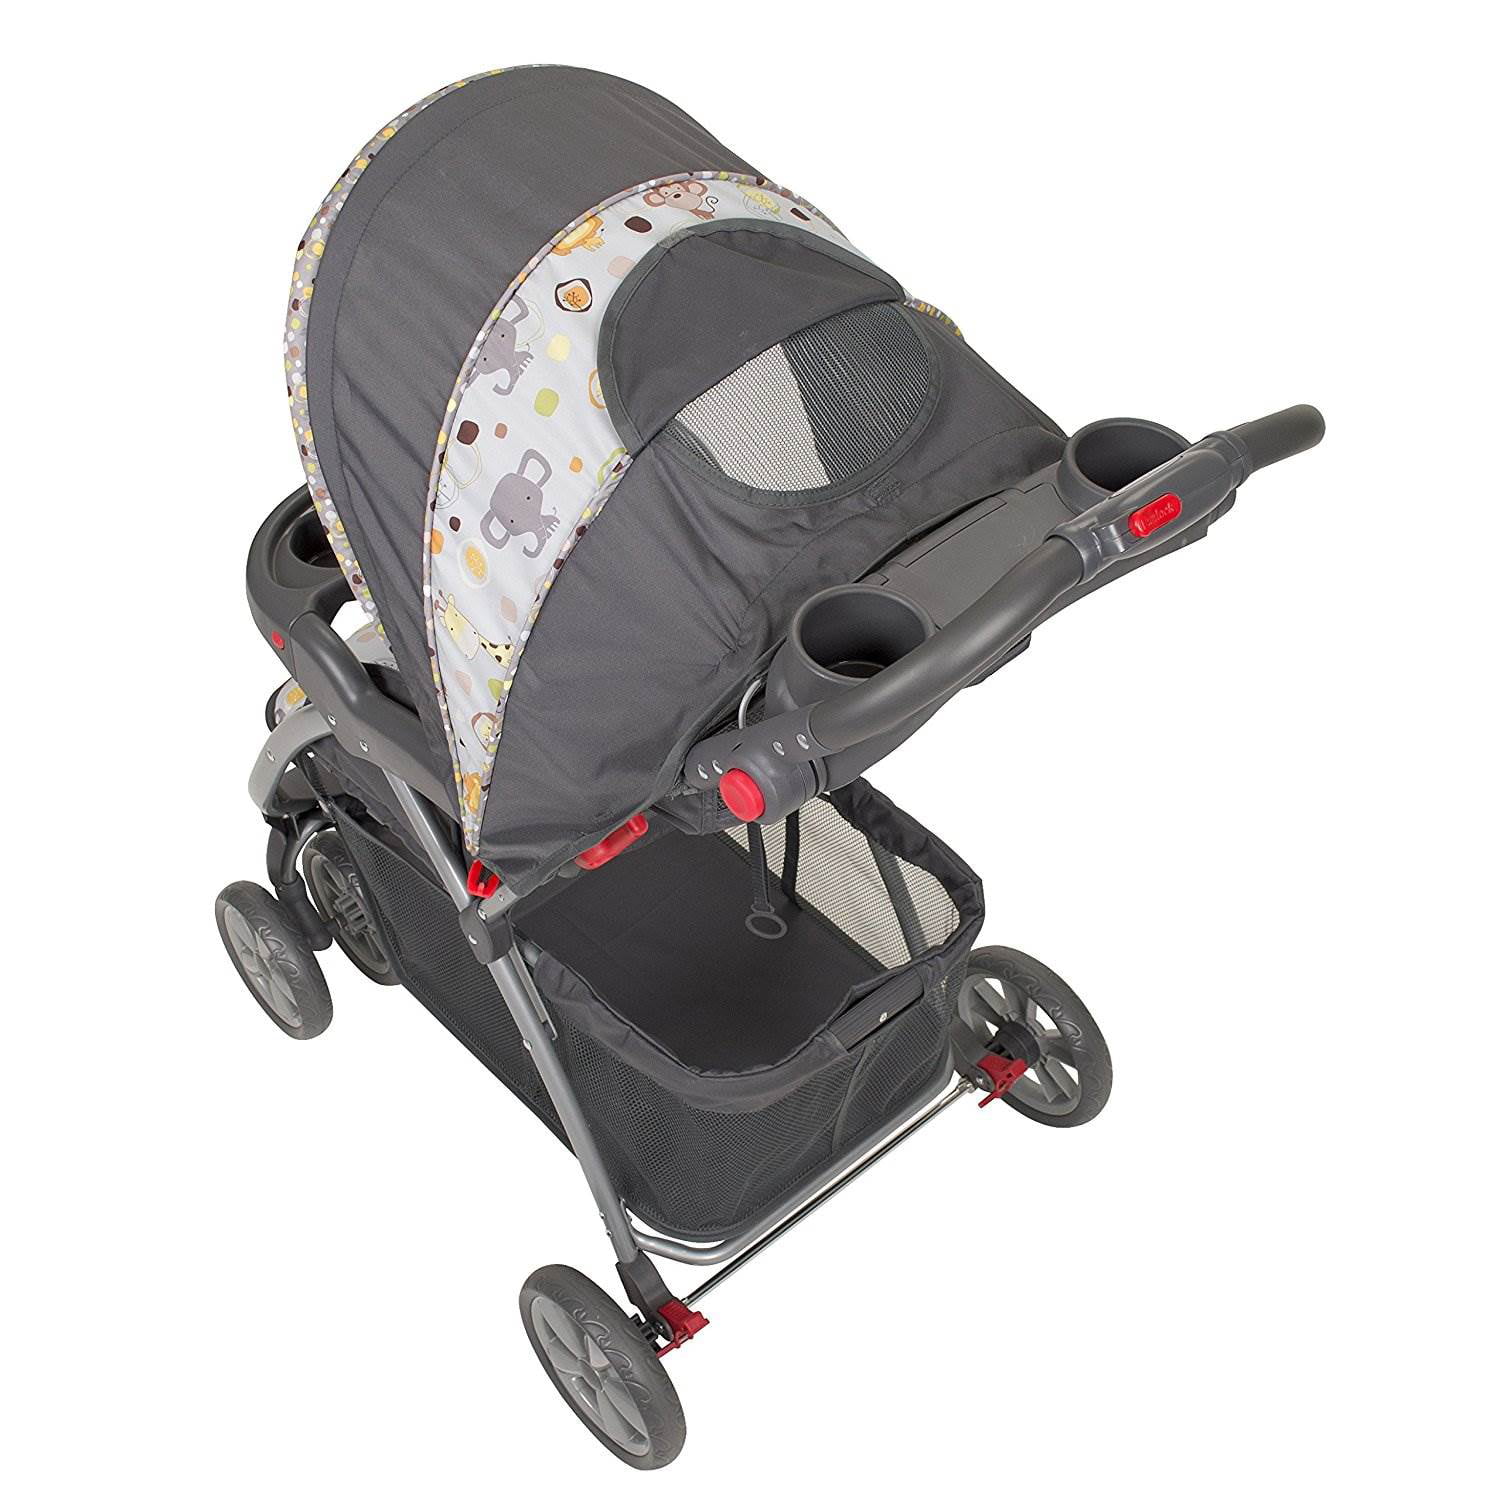 unisex stroller and carseat